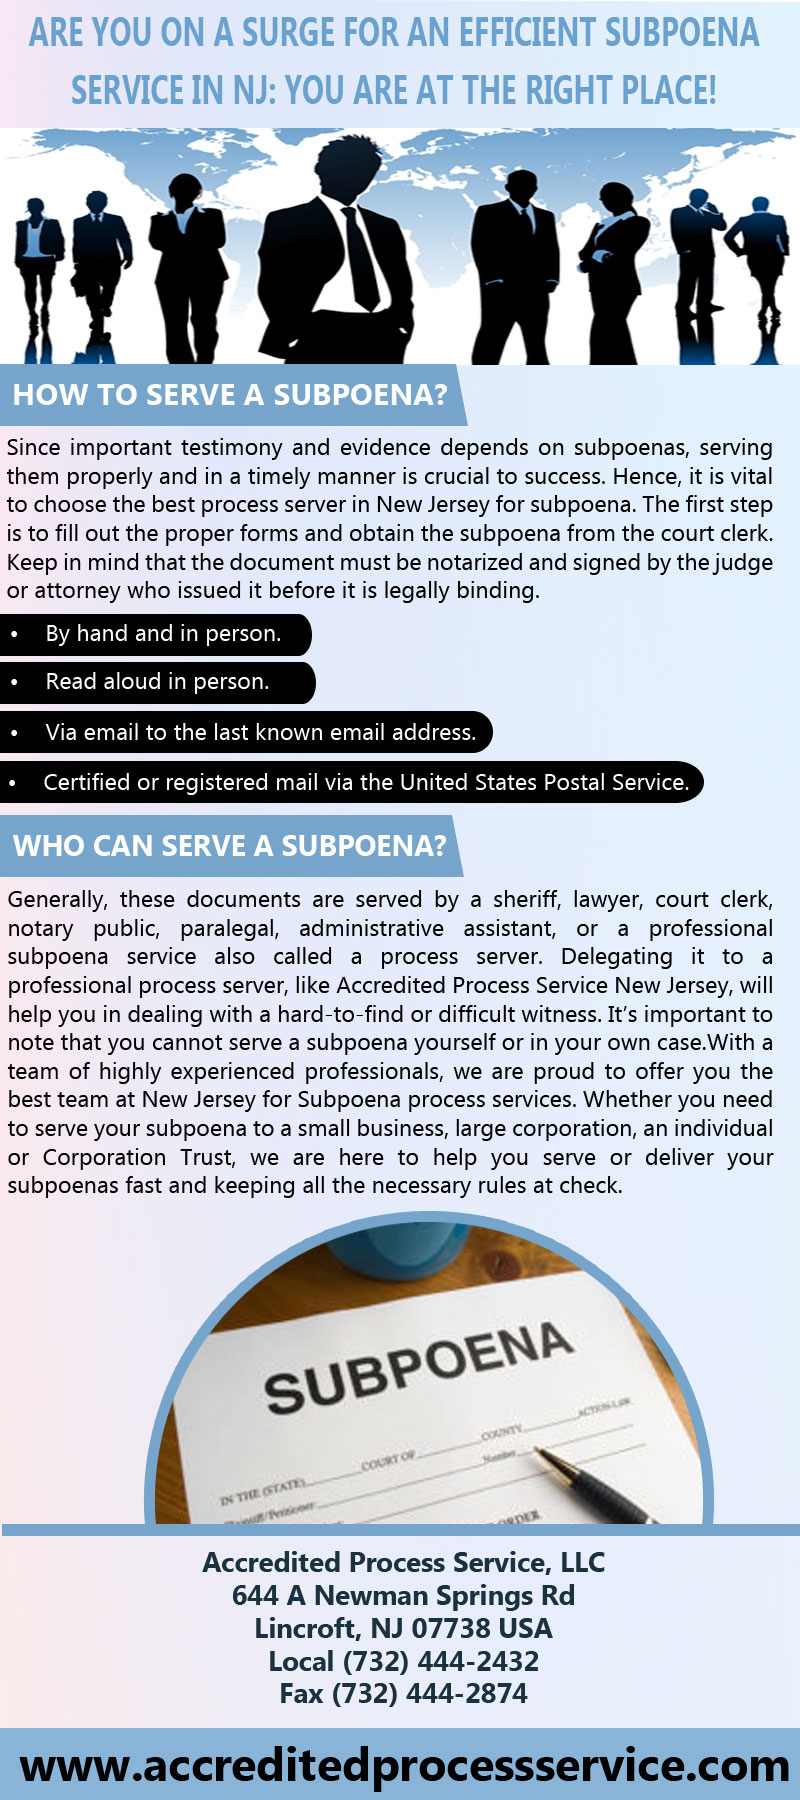 Are you on a Surge for an Efficient Subpoena Service in NJ You are at the Right Place.jpg  by Accreditedprocess